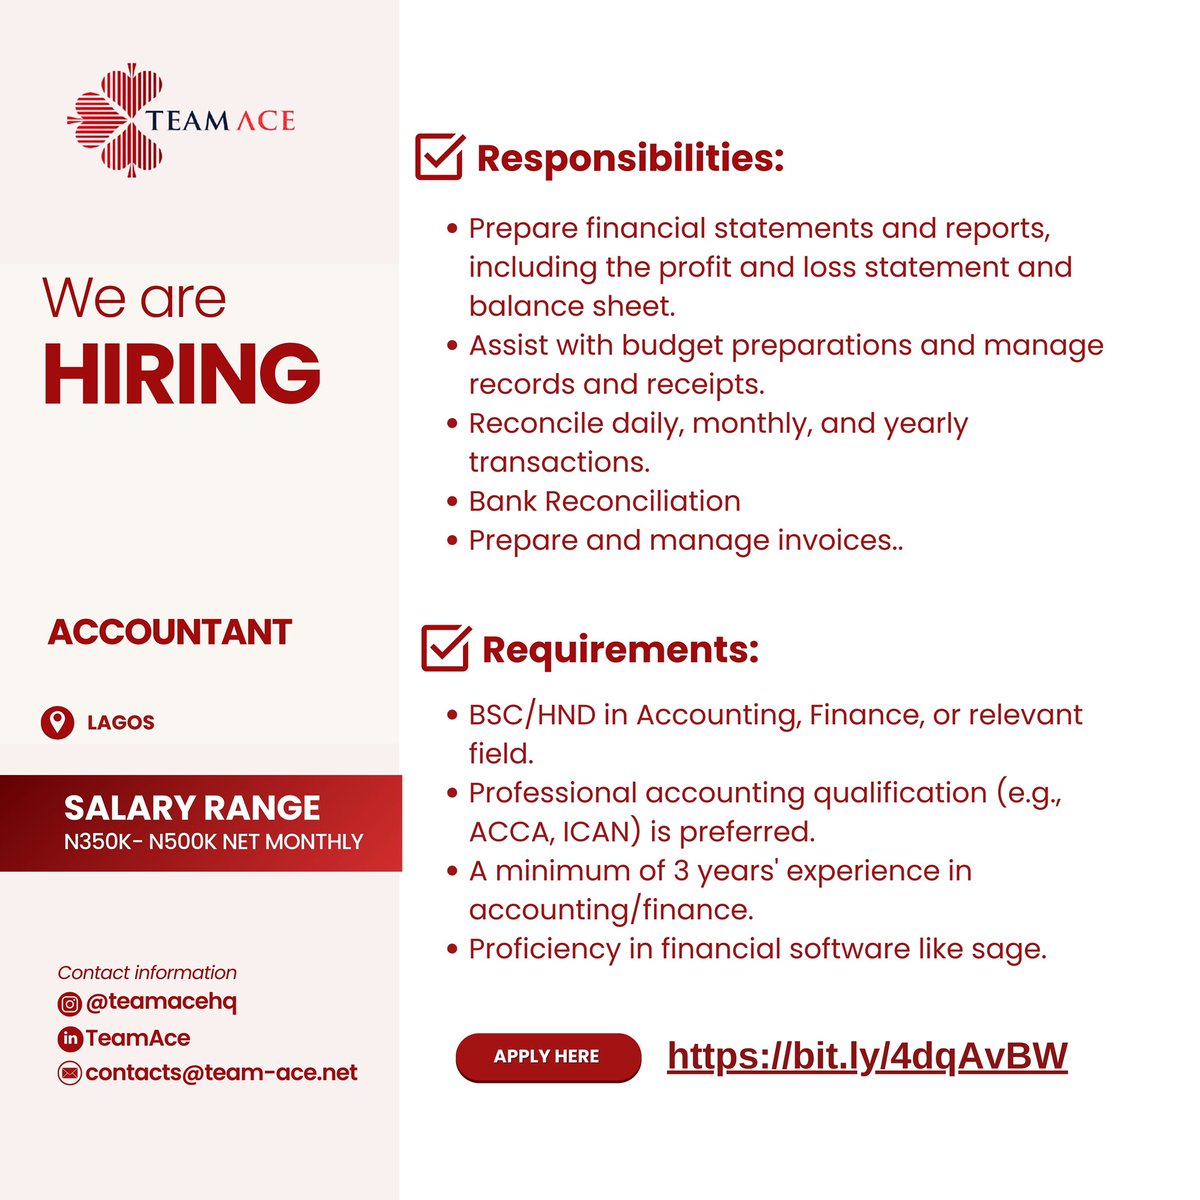 Job Opening!
See flier for details 

Qualified and Interested? Apply here👇🏽
bit.ly/4dqAvBW

#accountant #accountingjobs #hiringnow #jobvacancy #jobopening #jobopportunity #recruiting #teamace #Opay #stockmarketcrash